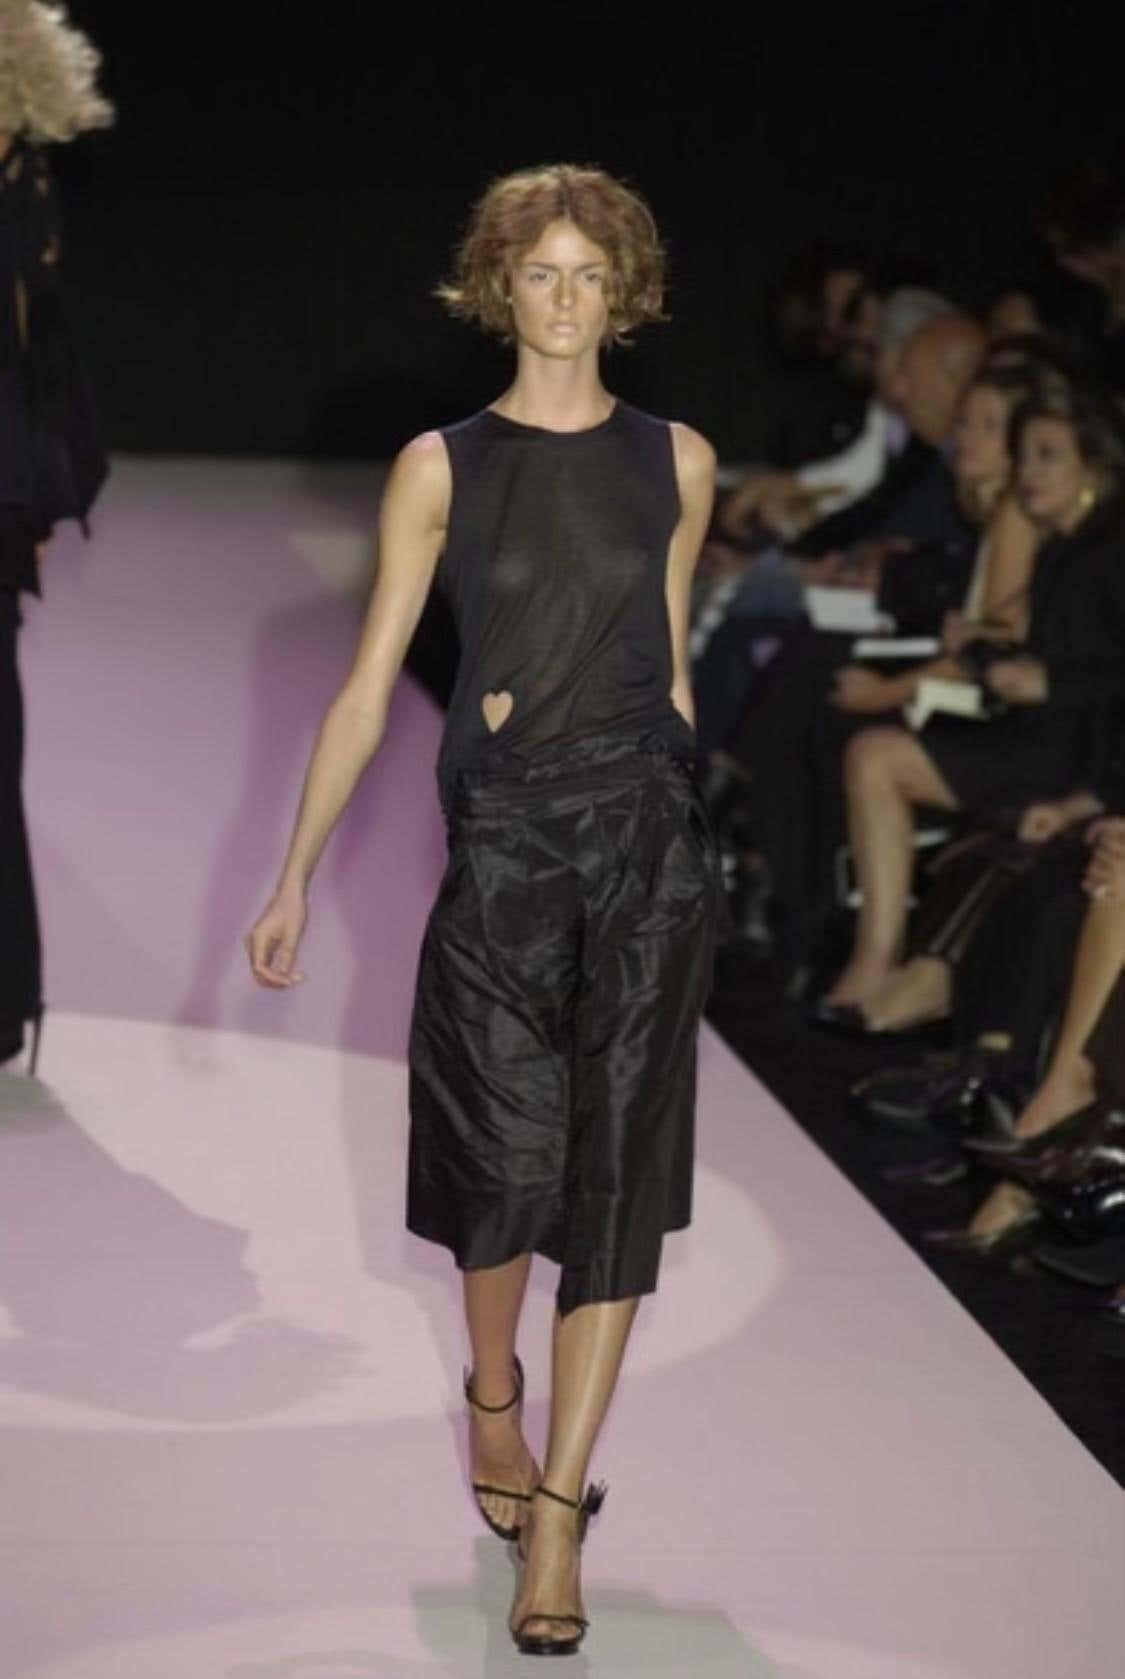 Presenting a black sleeveless Gucci shirt, designed by Tom Ford. From the Spring/Summer 2002 collection, this top debuted on look 33 modeled by Jacquetta Wheeler with the white version debuting as look 3 modeled by Abbey Shaine. This semi-sheer top